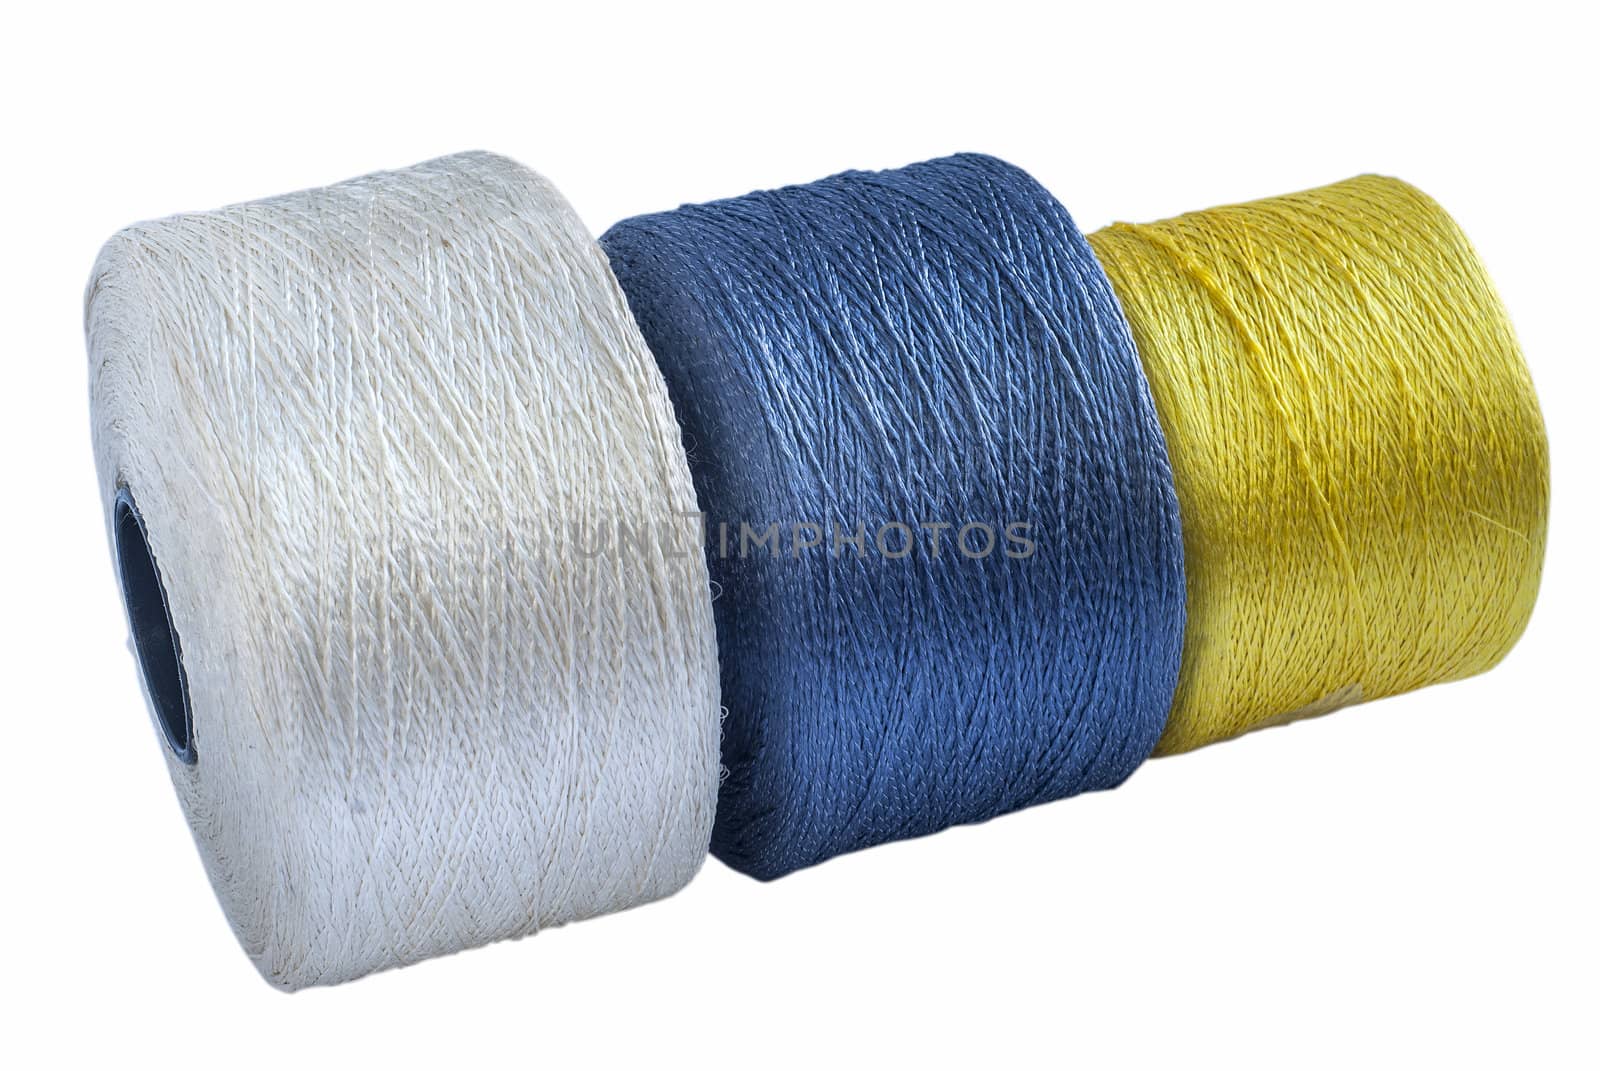 Colored silk yarn rolled on coils isolated on white background